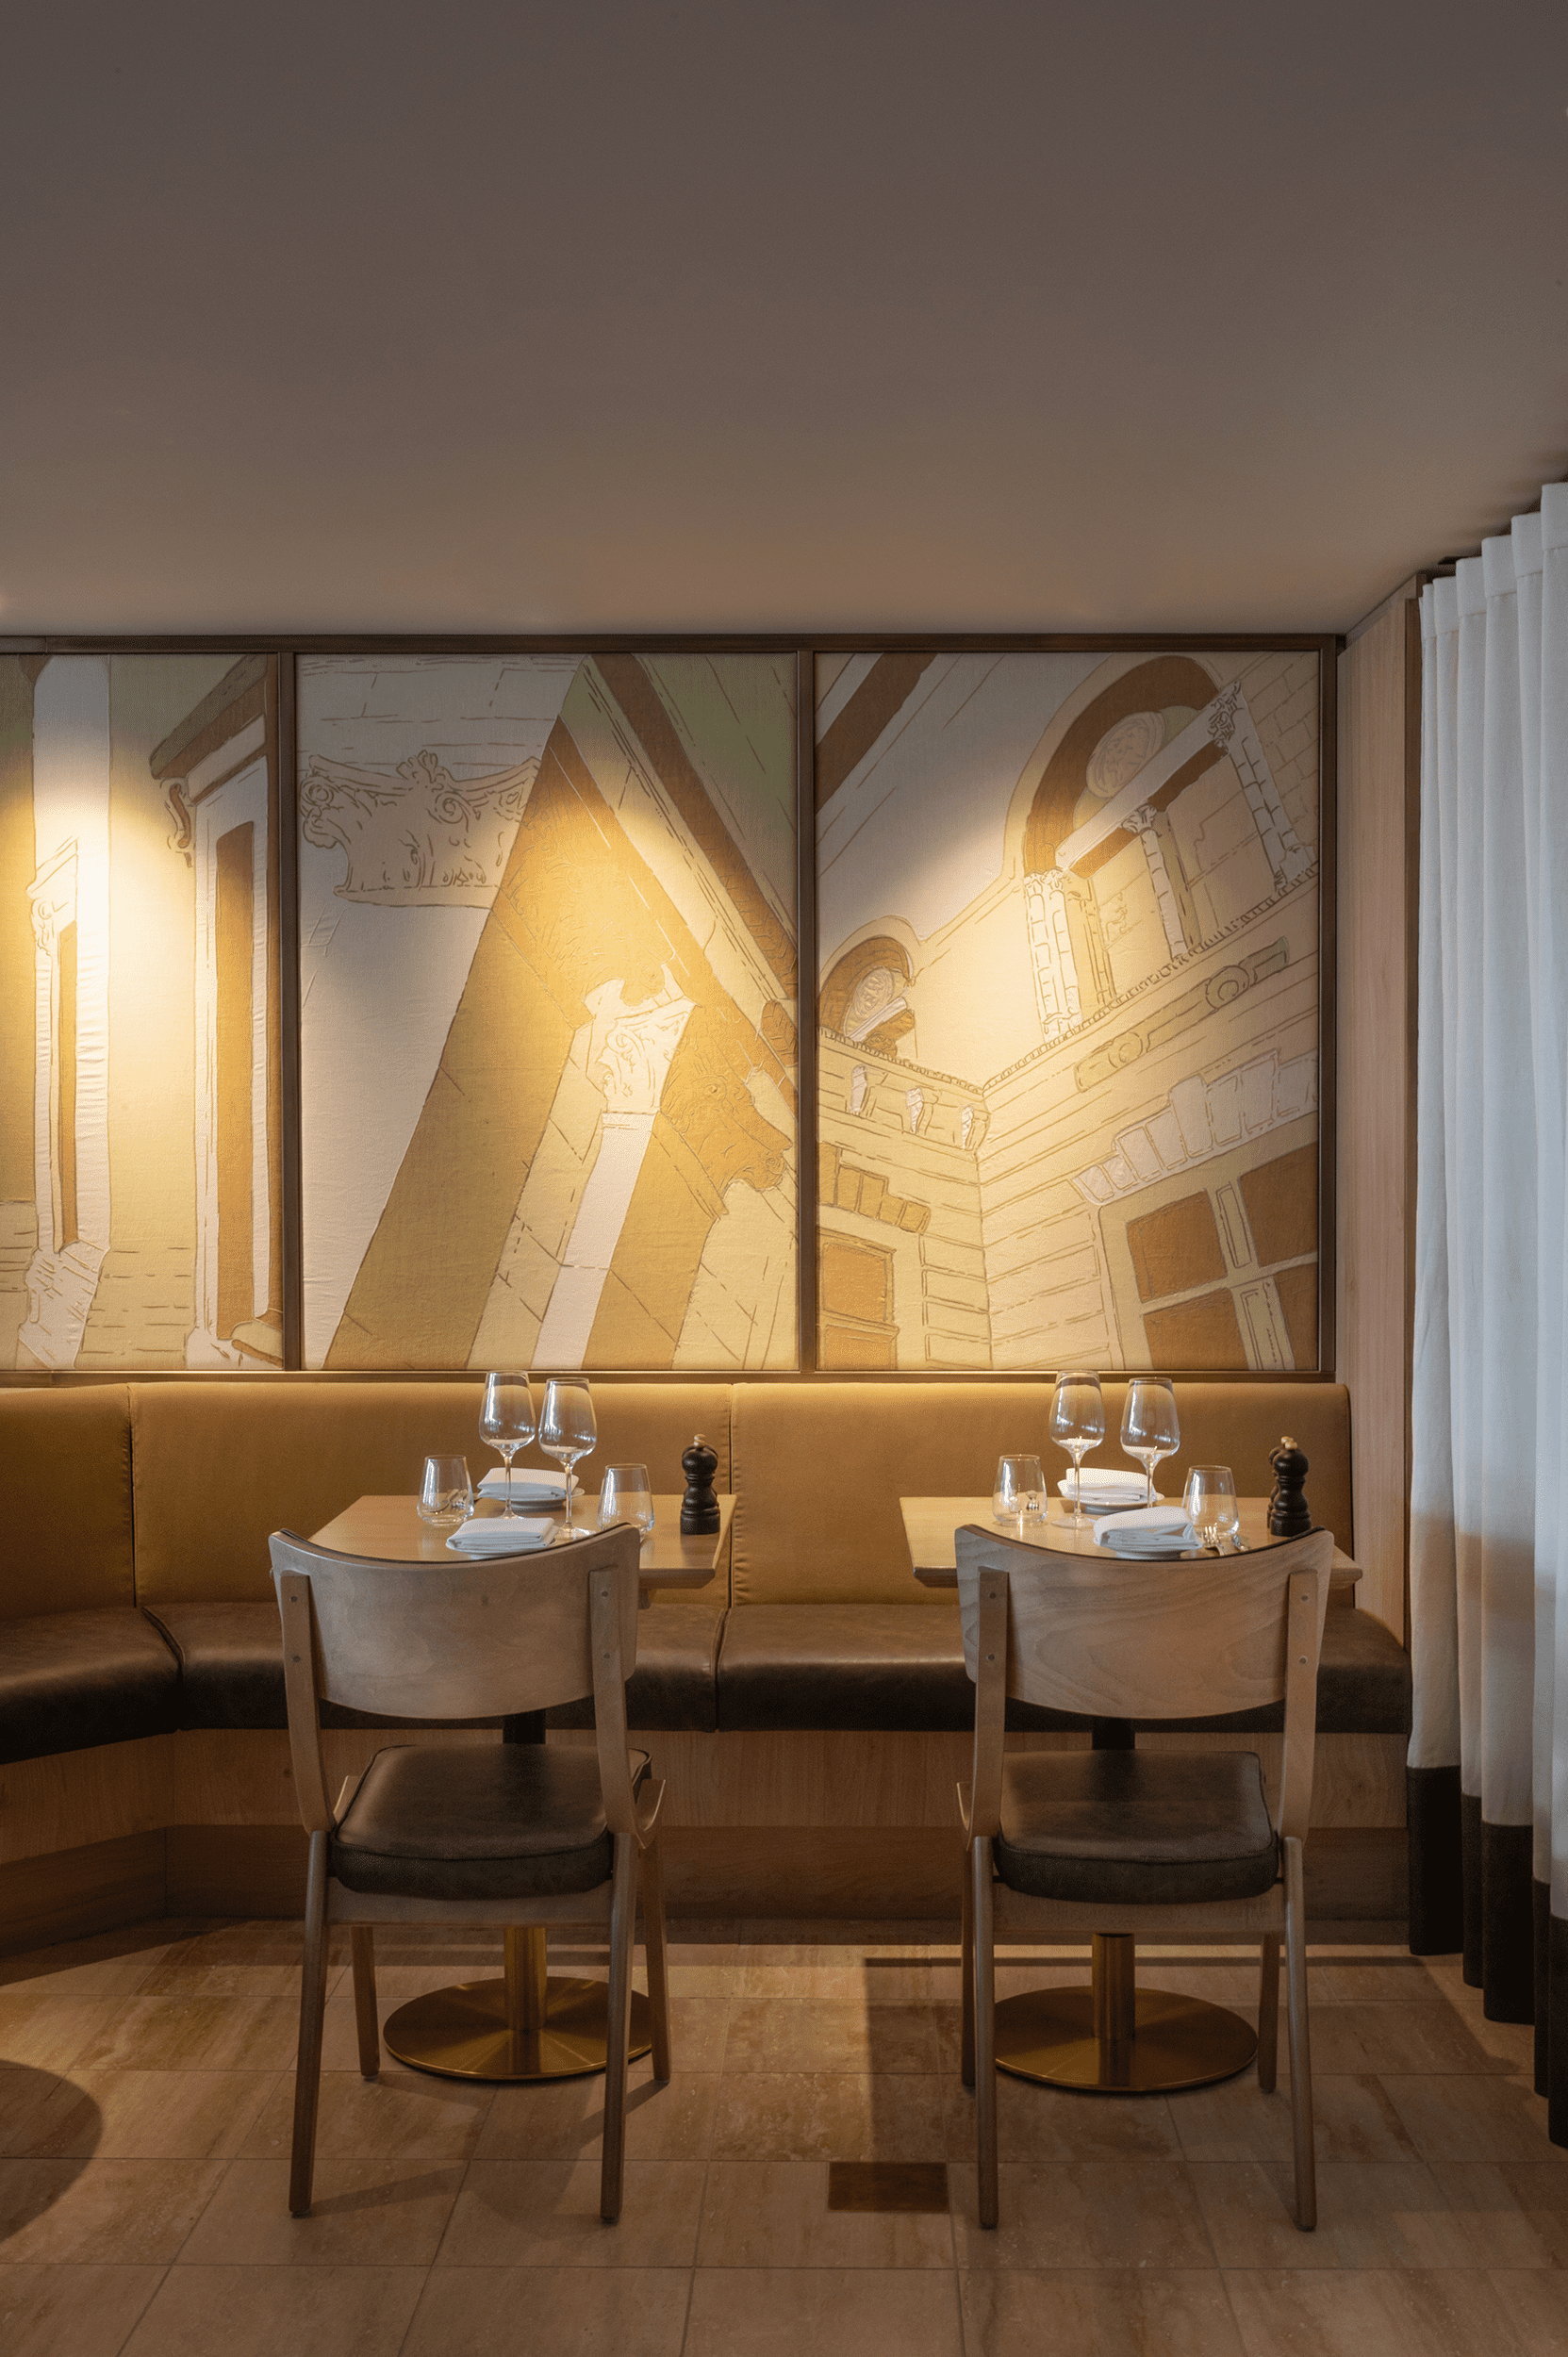 Bespoke wall covering and dining area in The Portrait restaurant, London